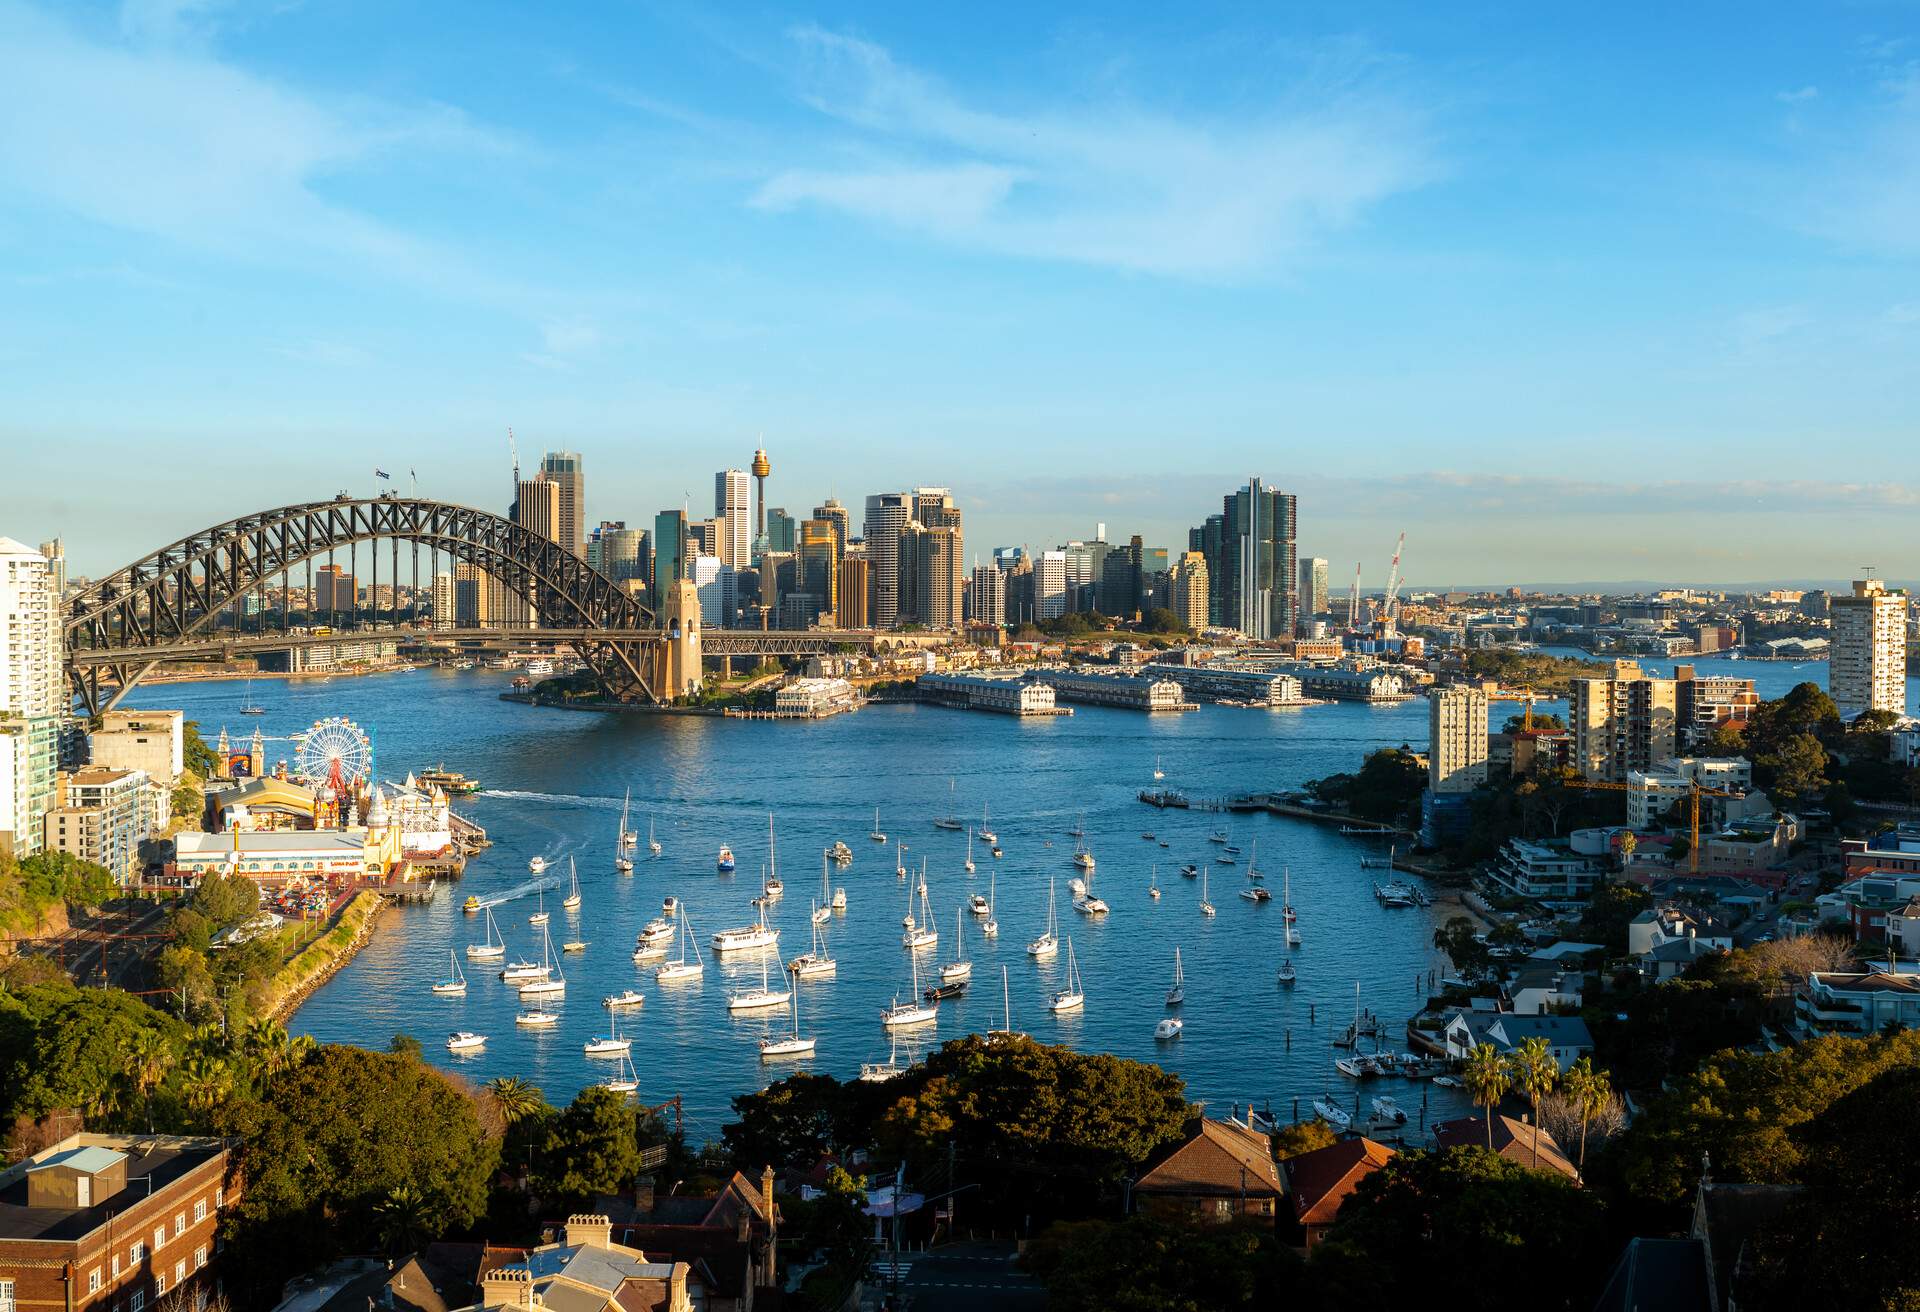 Cityscape image of Sydney, Australia with Harbour Bridge and Sydney skyline during summer day.